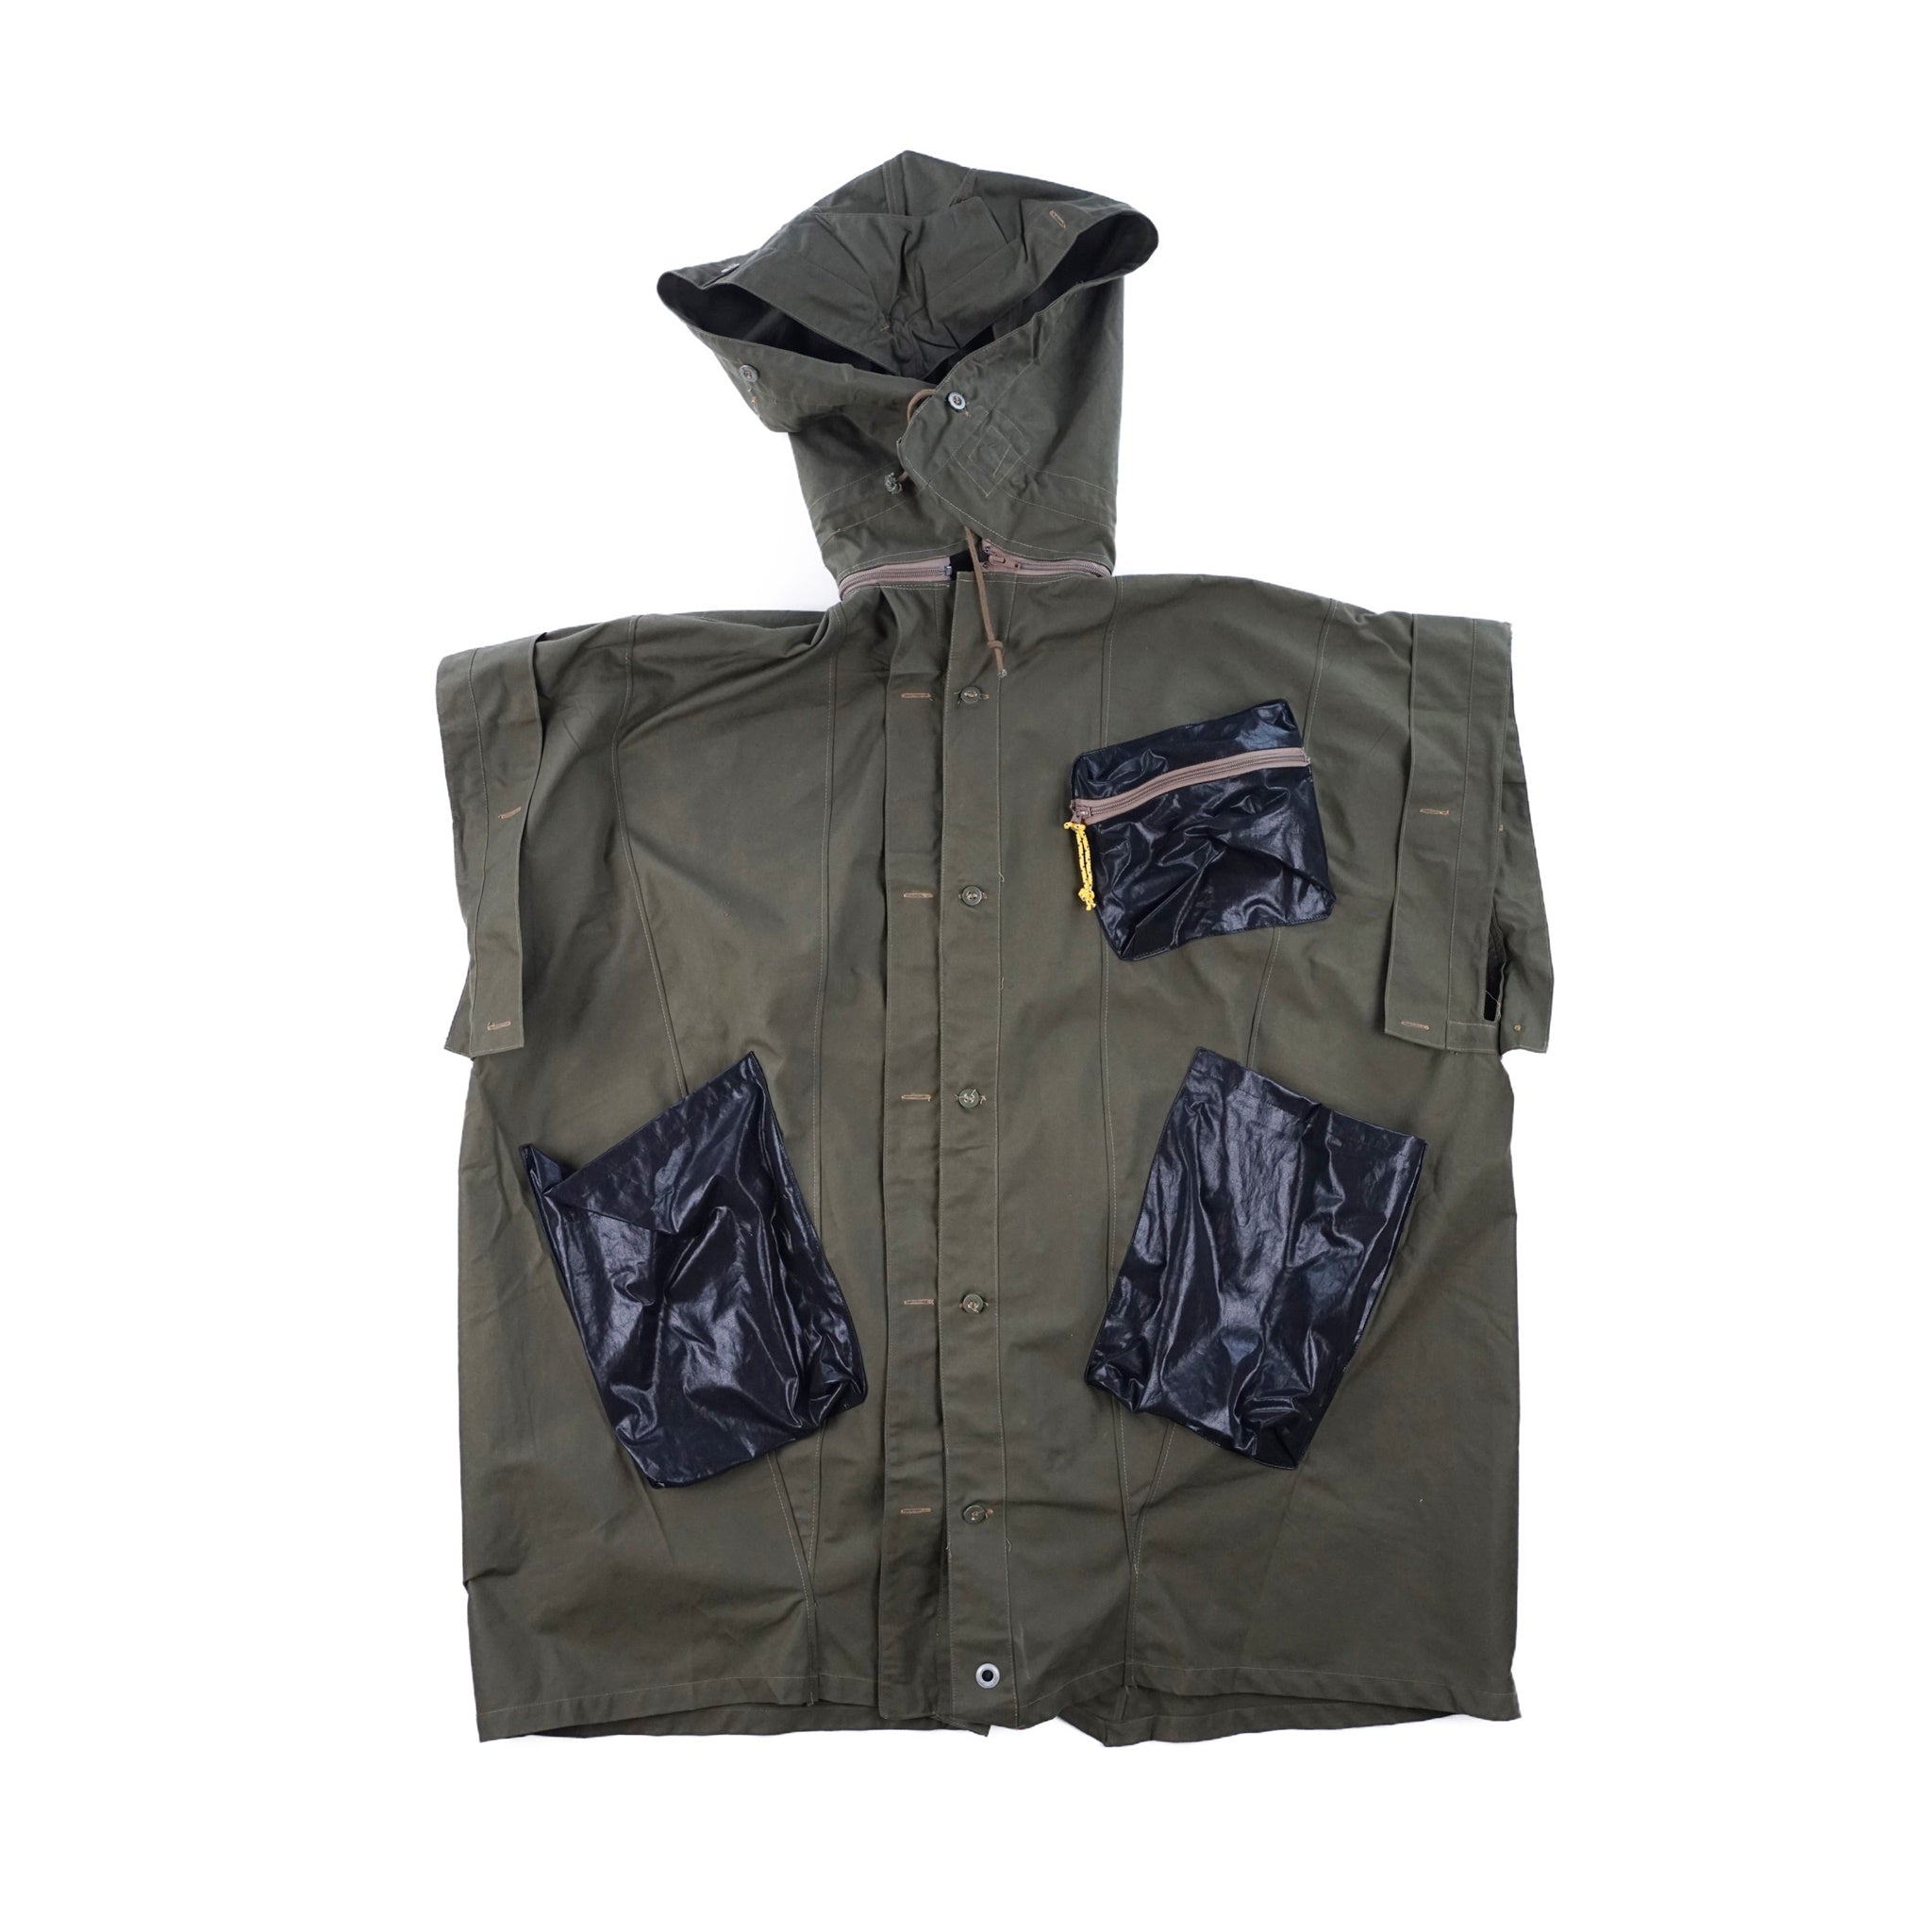 No:MO22SP-RS-PK01 | Name:U.S ARMY TENT OUTDOOR PARKA | Color:Olive